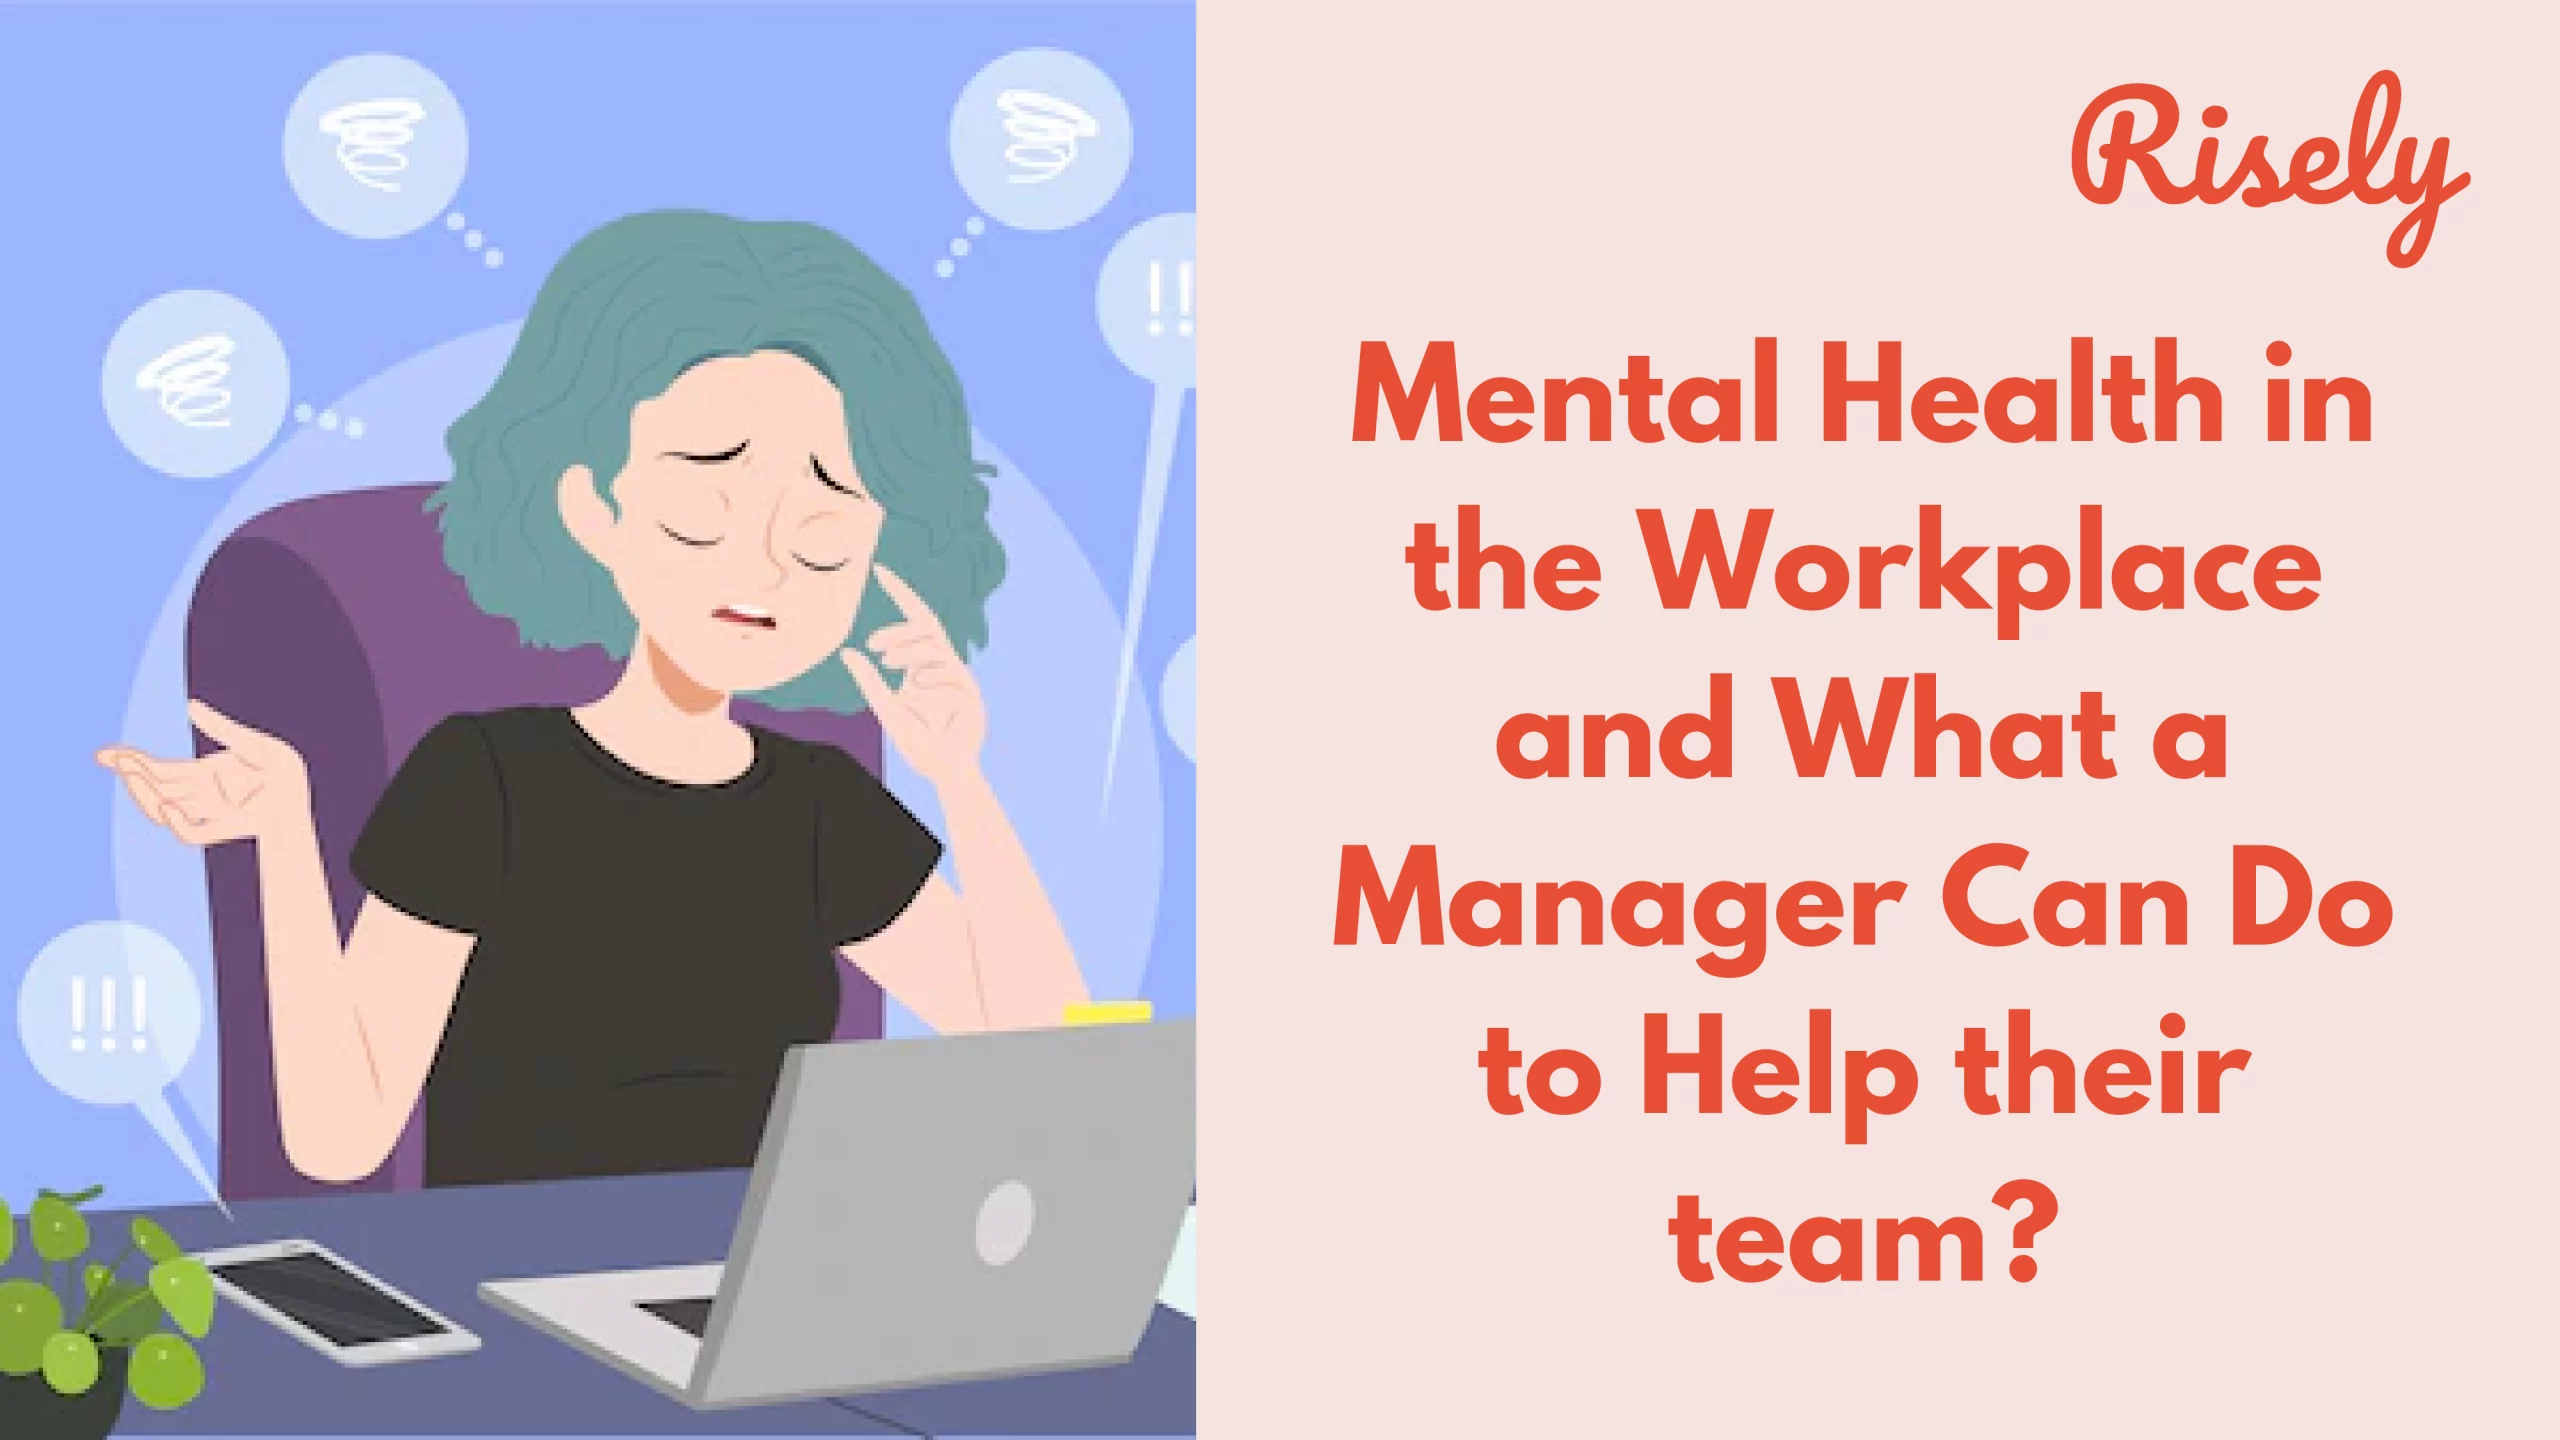 Mental Health in the Workplace and What a Manager Can Do to Help their team?